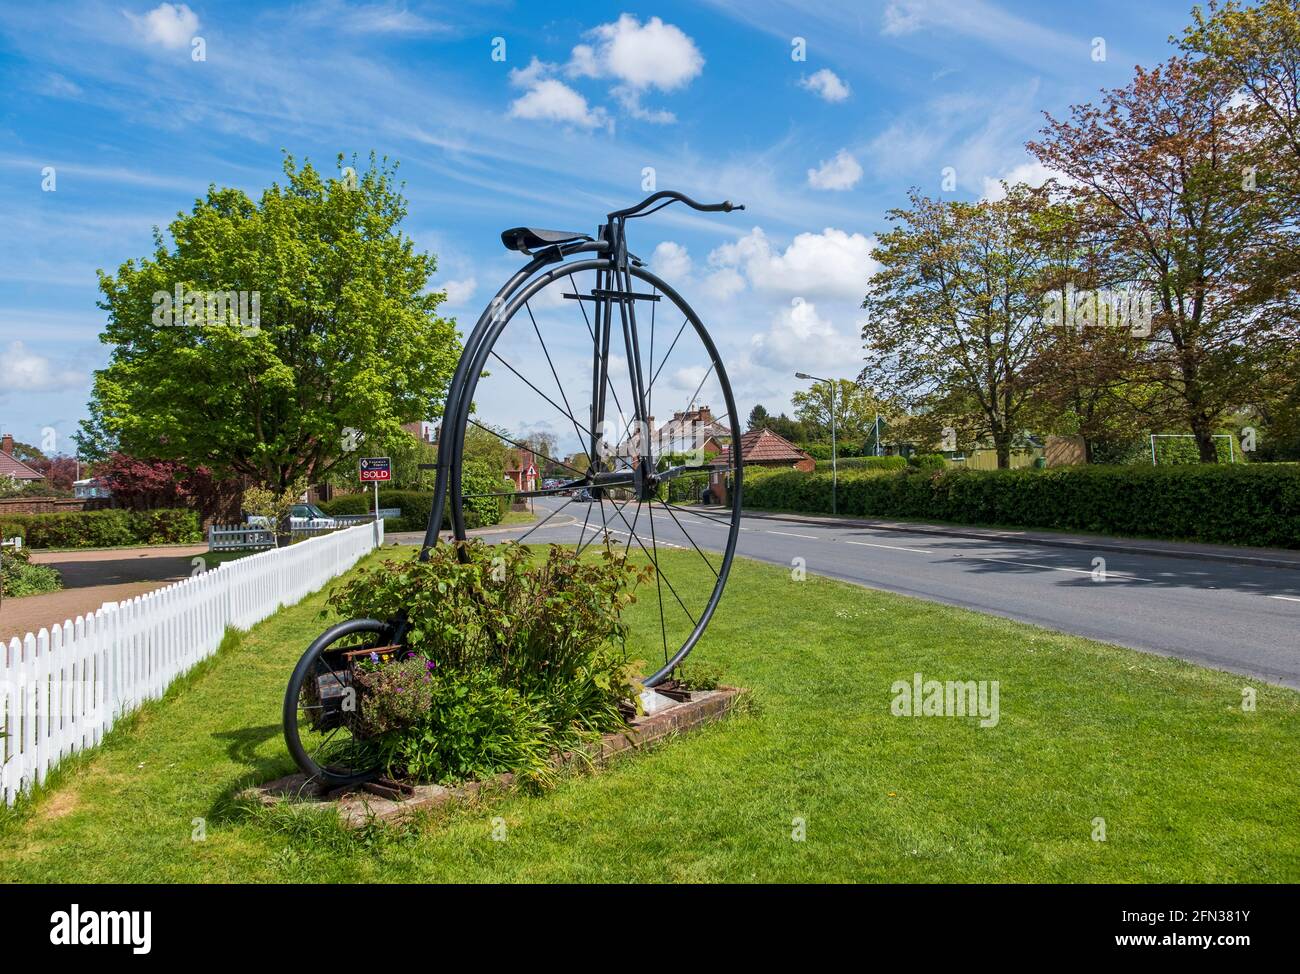 Giant Penny Farthing bicycle at the entrance to Sissinghurst Village, Kent, UK Stock Photo